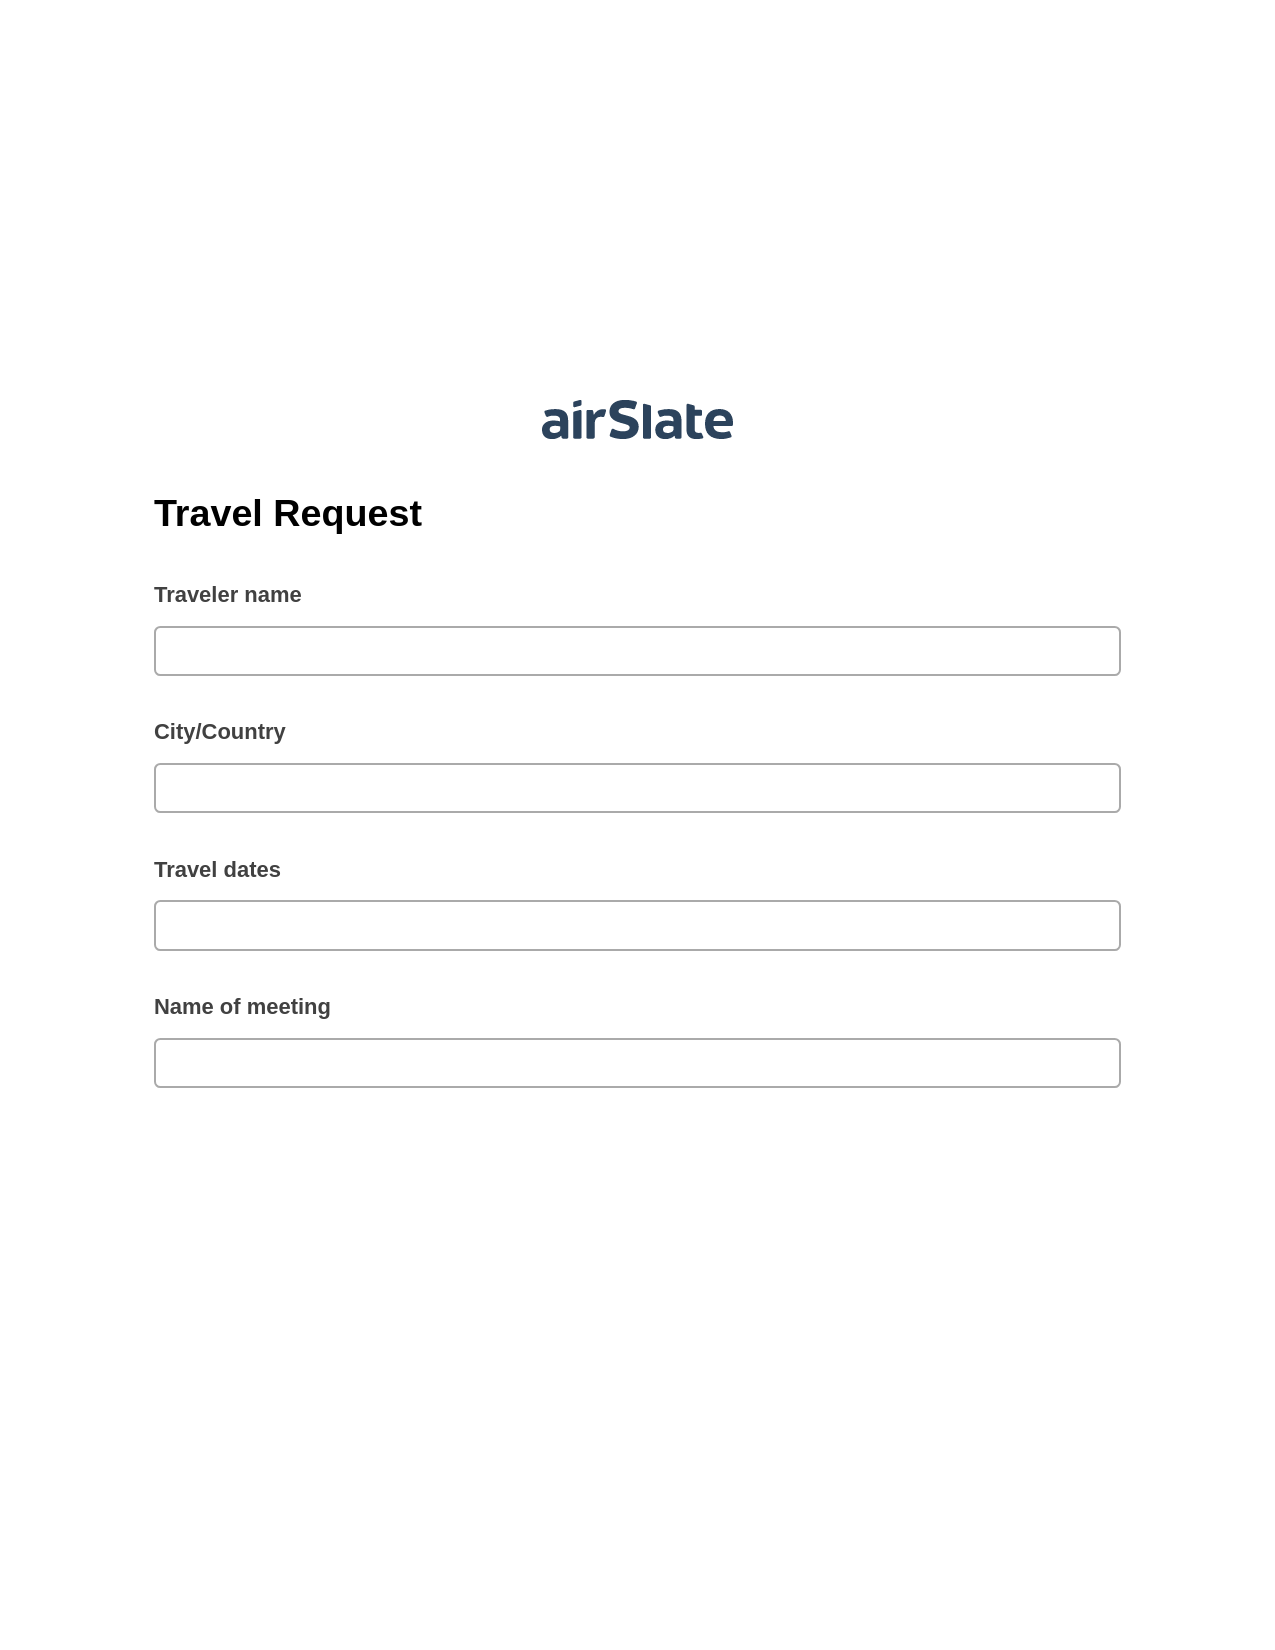 Travel Request Pre-fill from CSV File Bot, Create slate addon, Archive to SharePoint Folder Bot